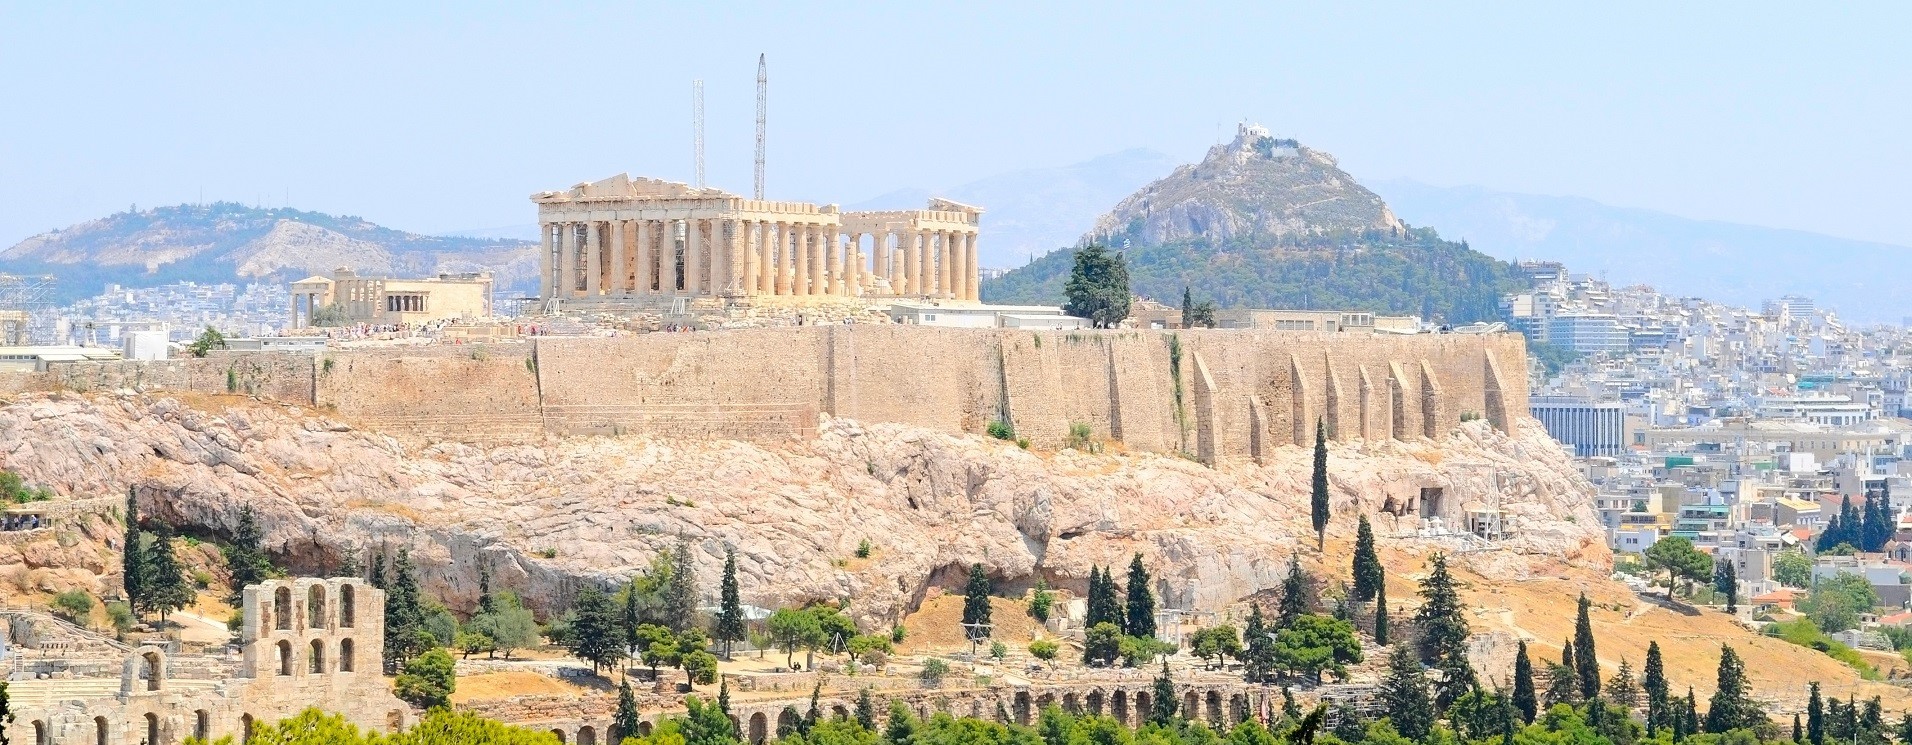 Early Access to the Acropolis of Athens Semi Private Walking Tour